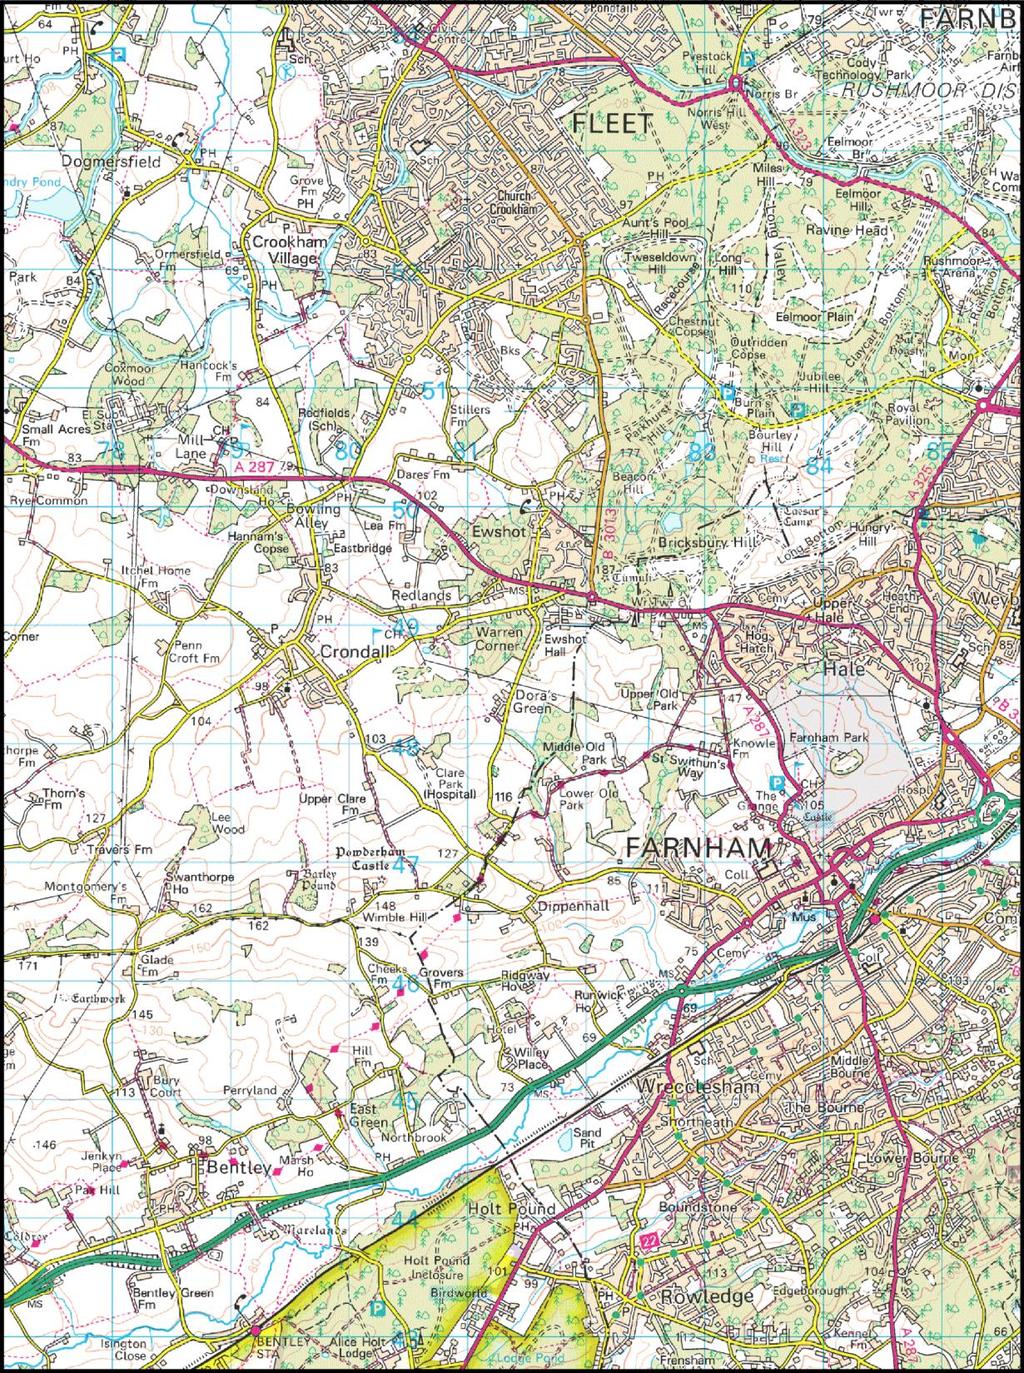 Crown copyright and database rights 2015 Ordnance Survey 100032782 TAG Farnborough Airspace Consultation A 1,000 ft B 2,000 ft C 3,000 ft Grid squares 1km per side D 4,000 ft E 5,000 ft See Figure 6